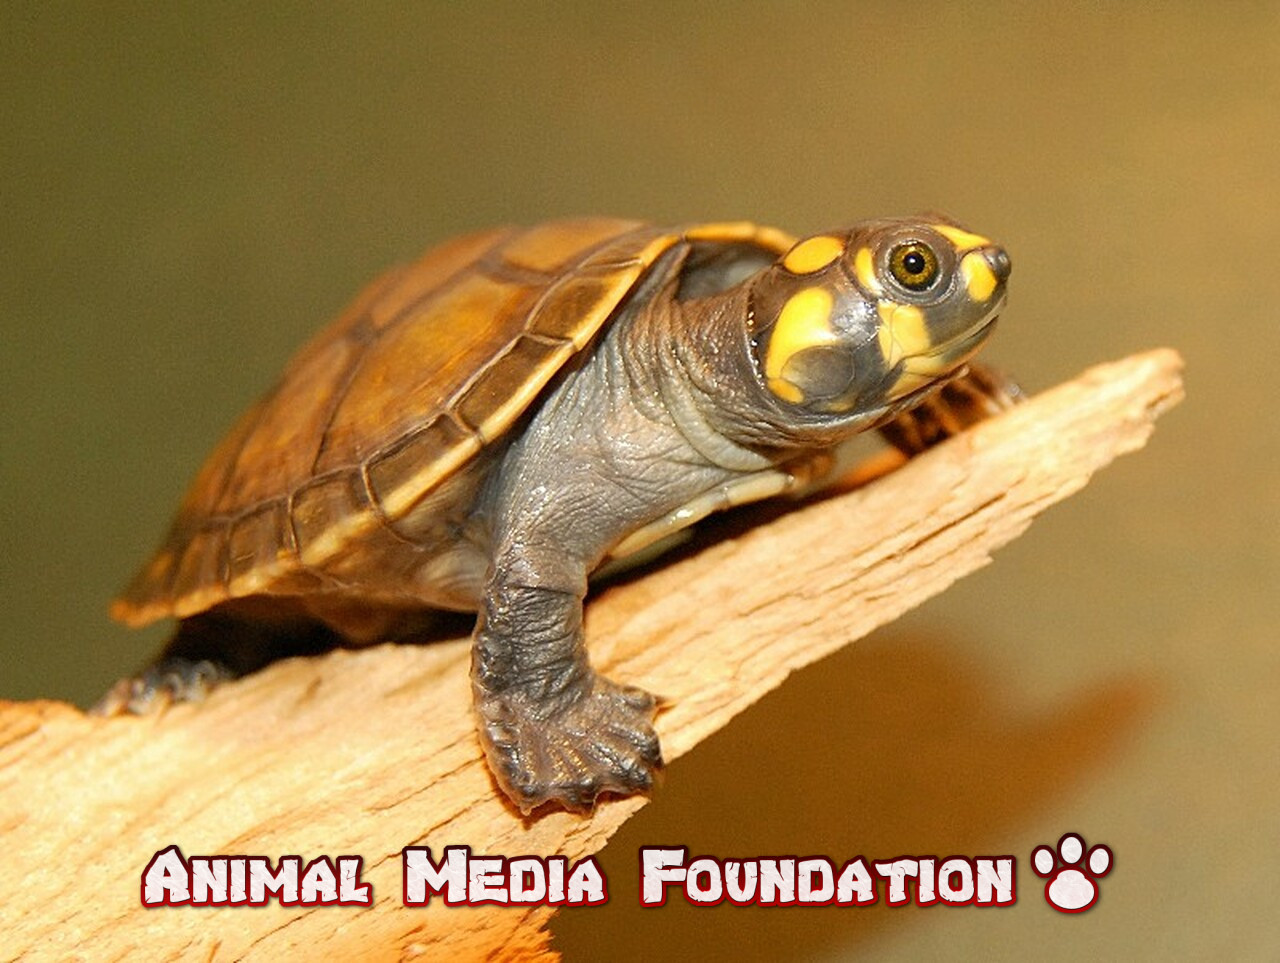 Yellow-spotted Amazon river turtle